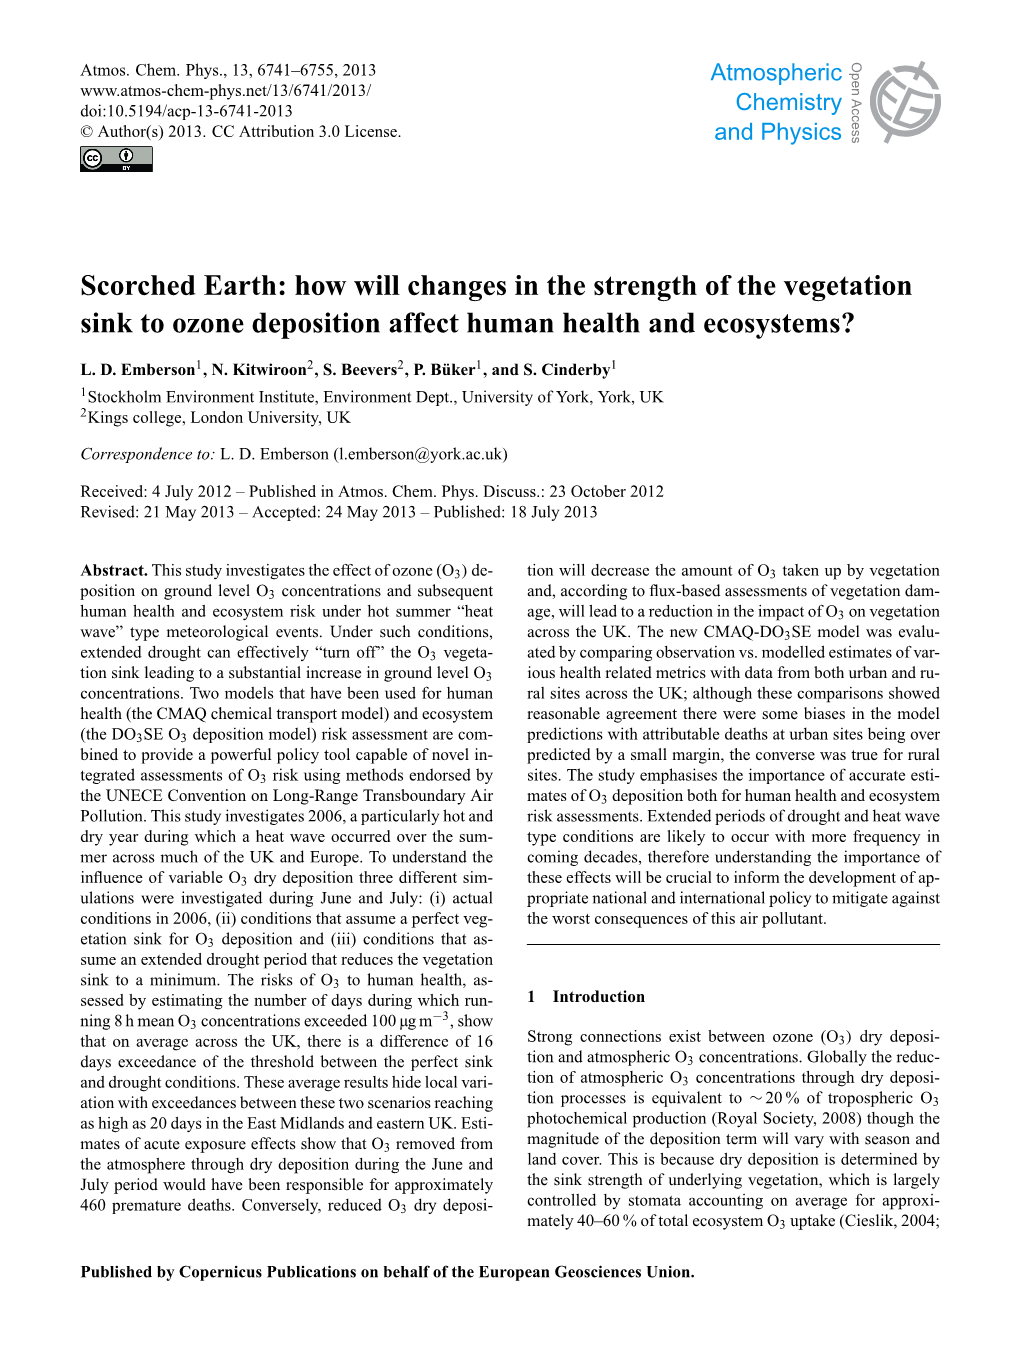 Scorched Earth: How Will Changes in the Strength of the Vegetation Sink To